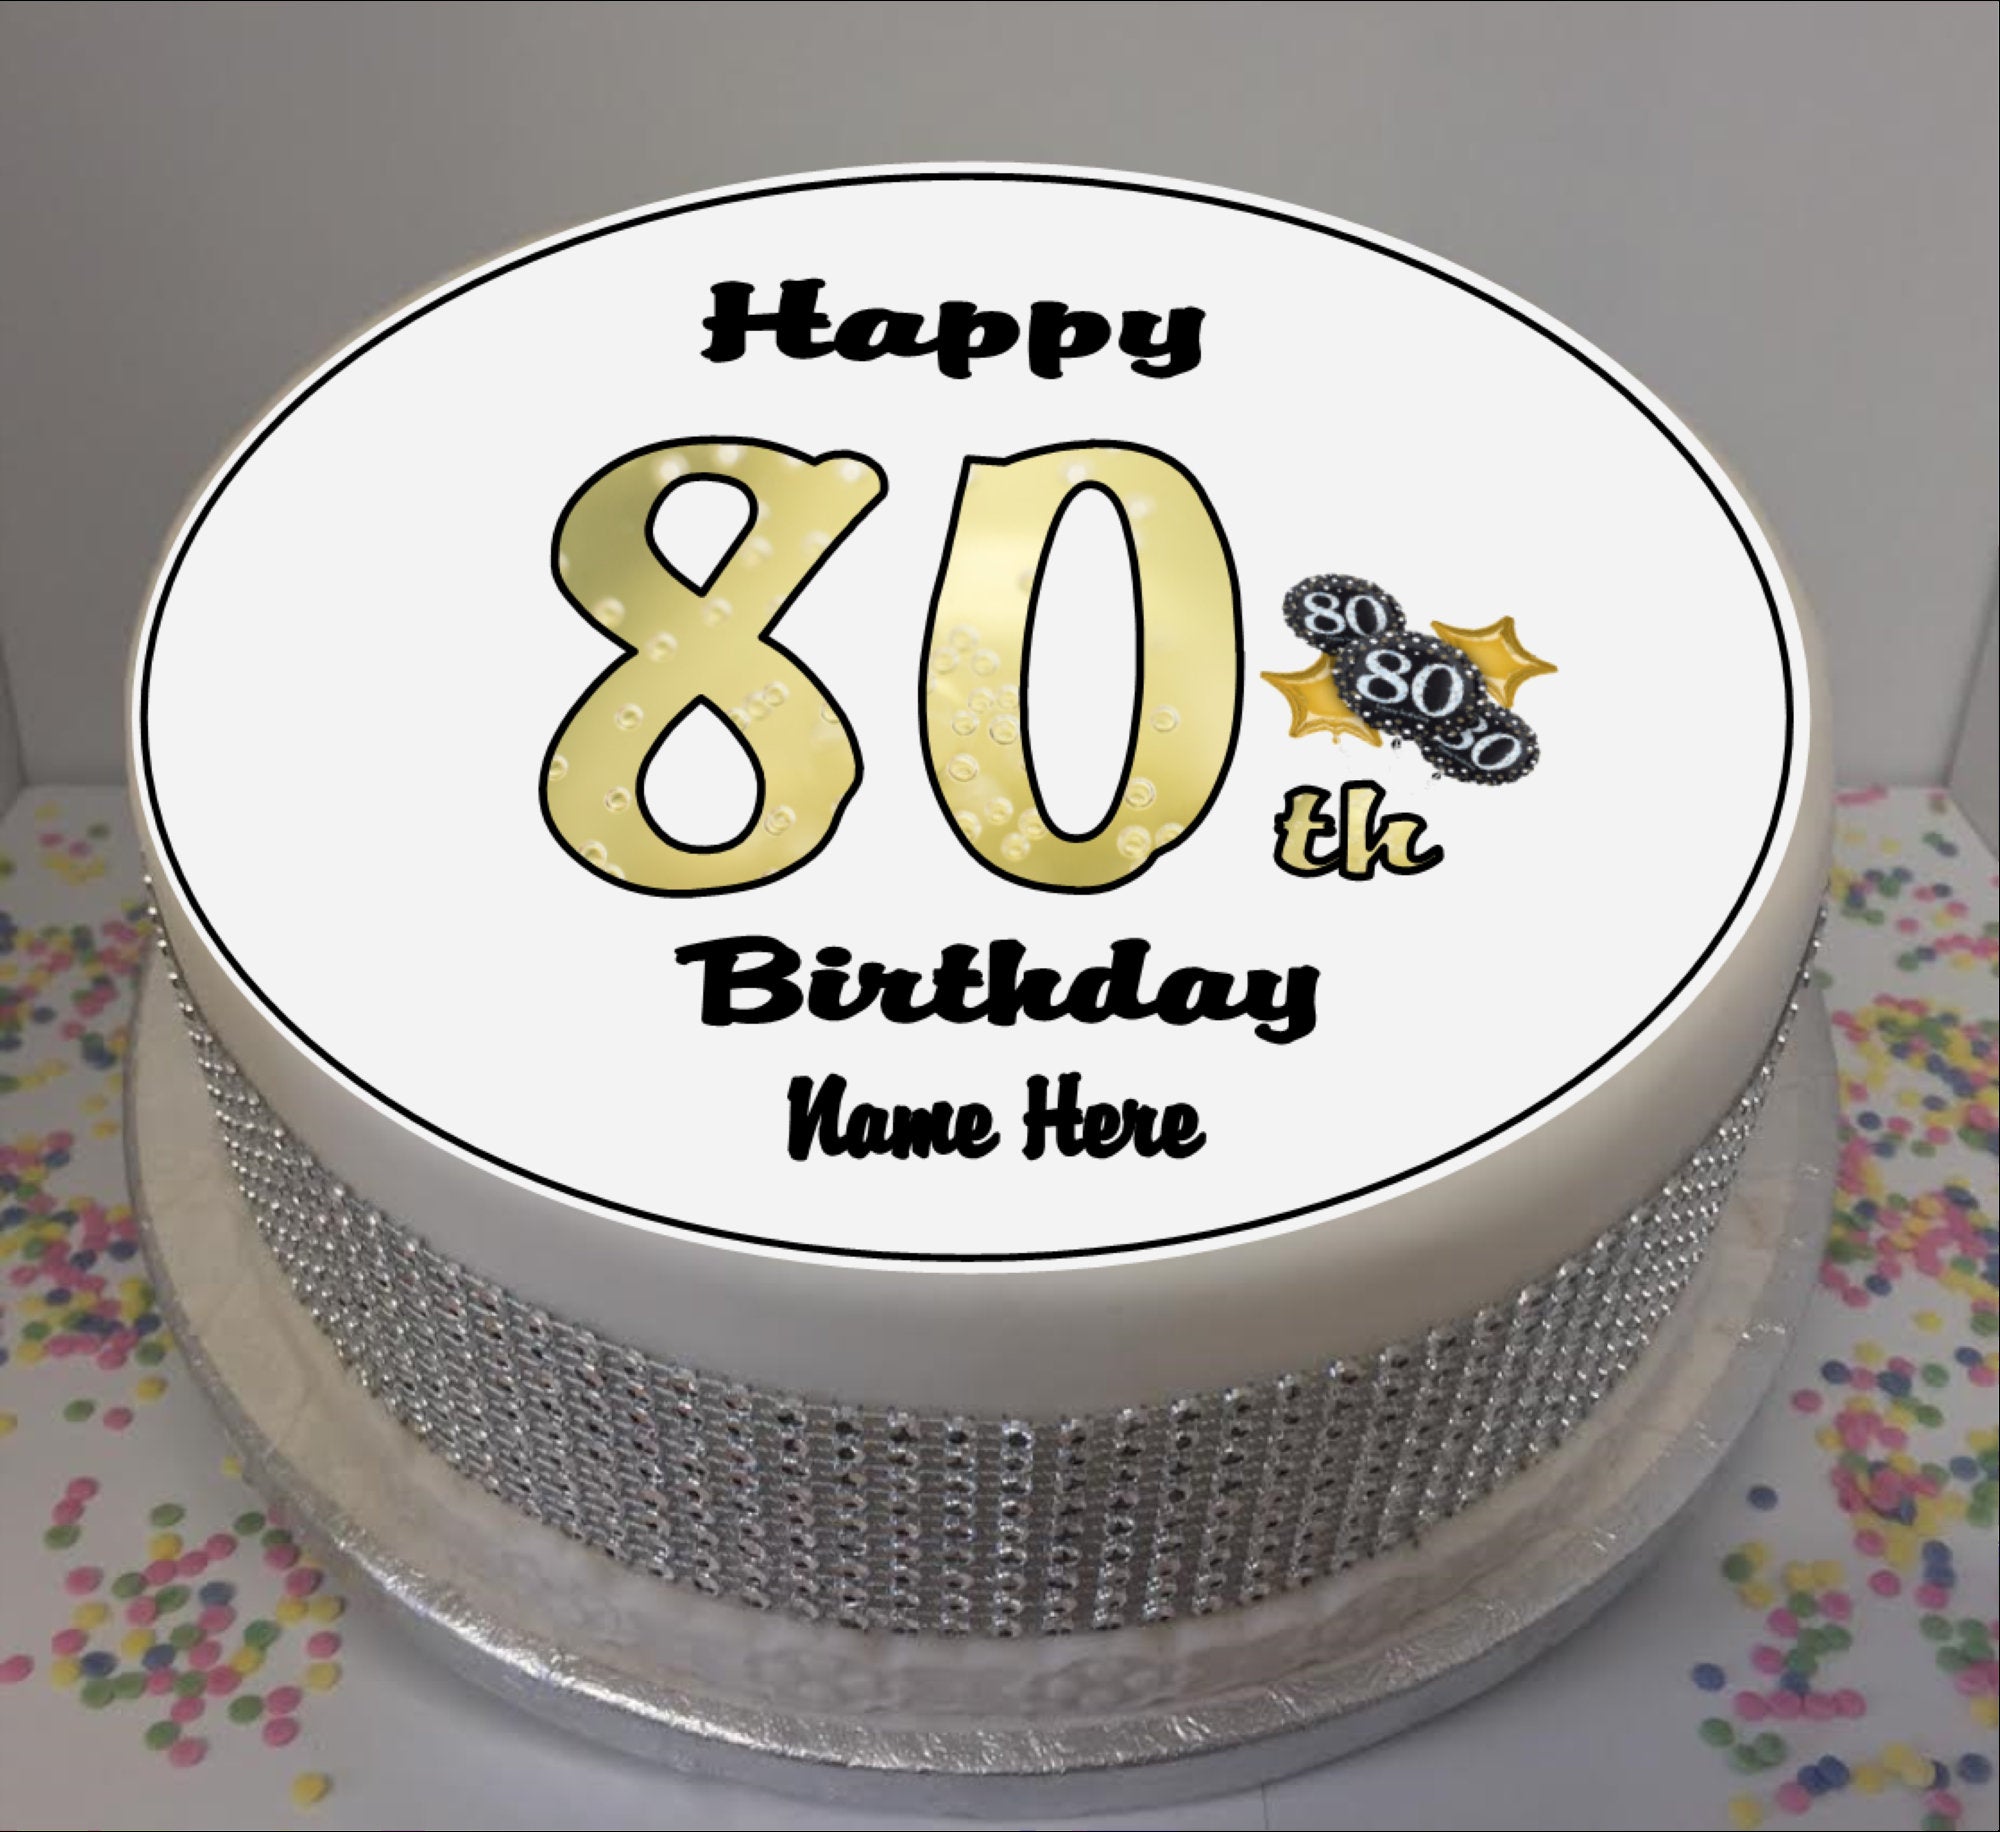 90th birthday party, 90 years loved sheet cake with buttercream icing and  edible image. | 90th birthday cakes, Birthday sheet cakes, Birthday cupcakes